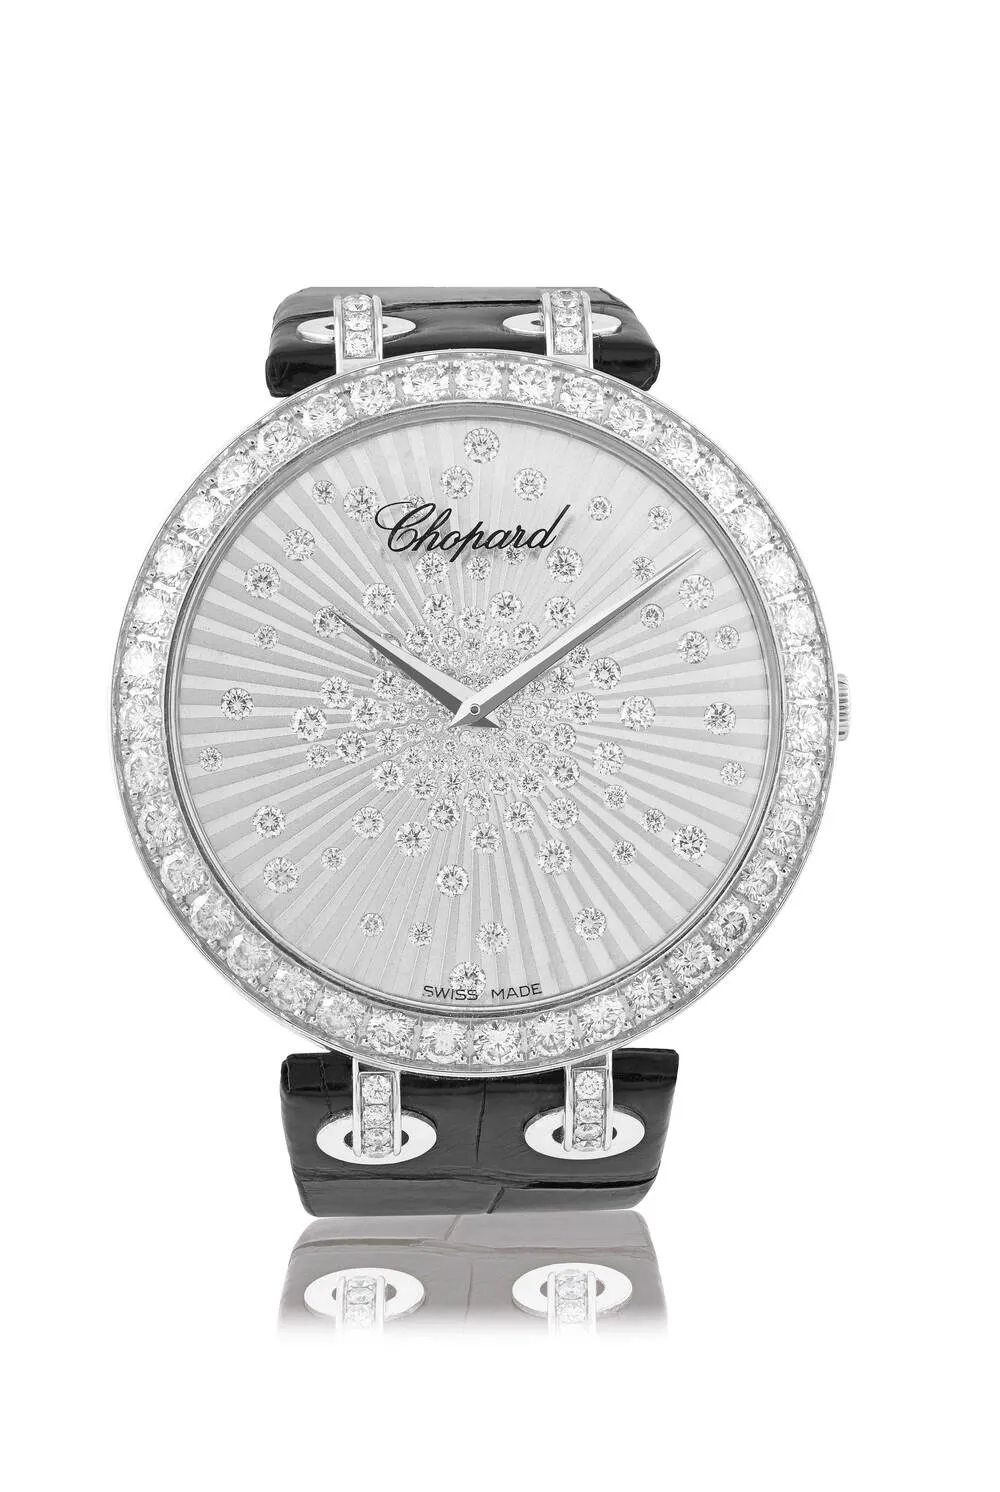 Chopard Imperiale 4235 nullmm